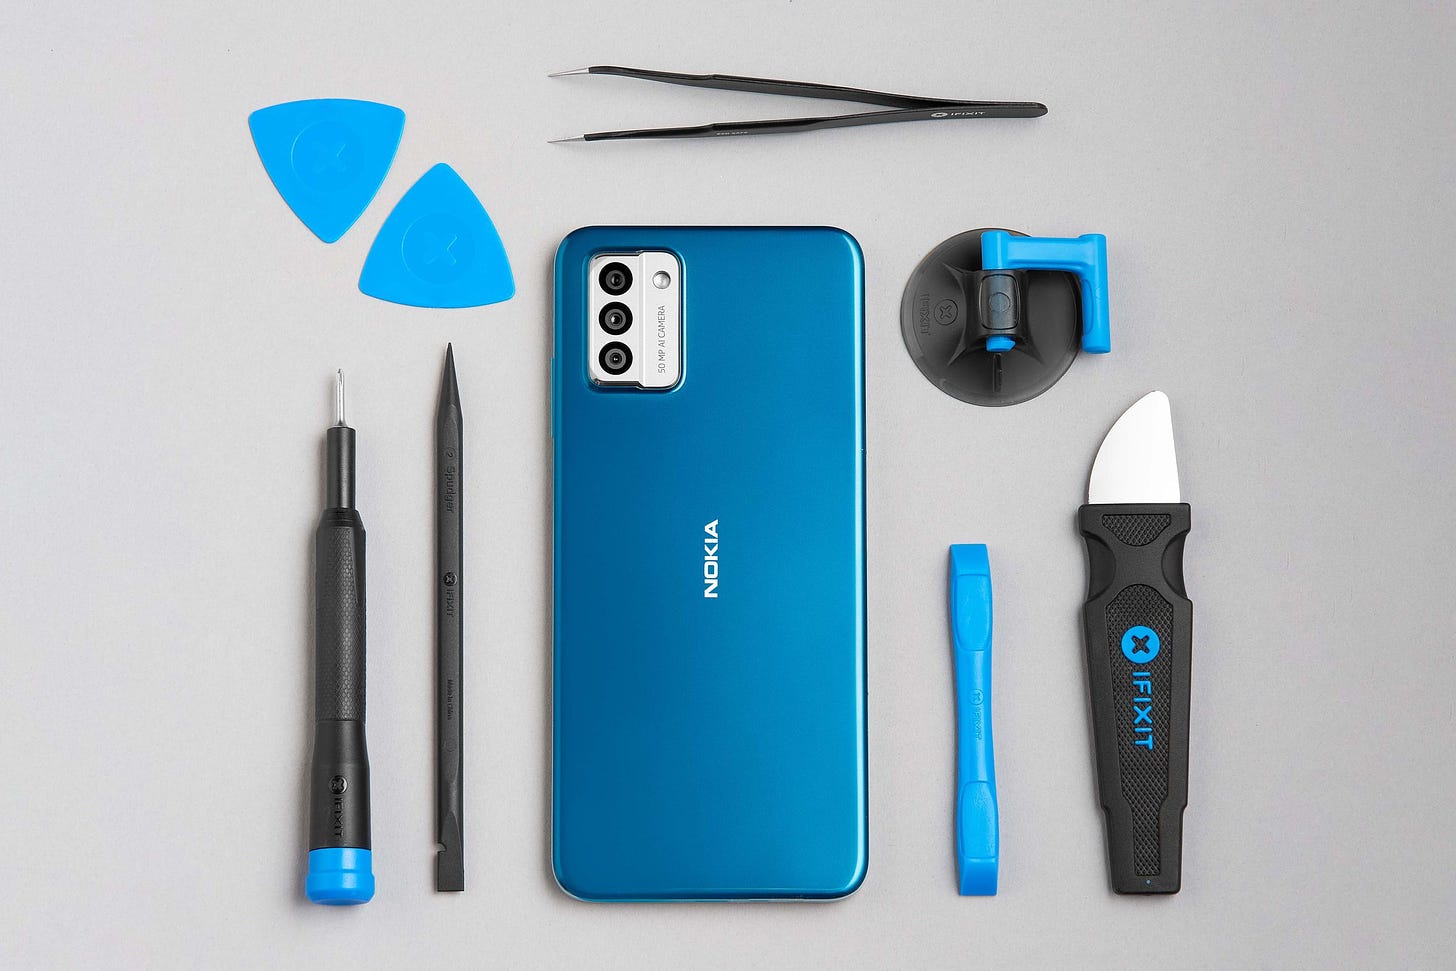 The Nokia G22 from the back, surrounded by iFixit repair tools.